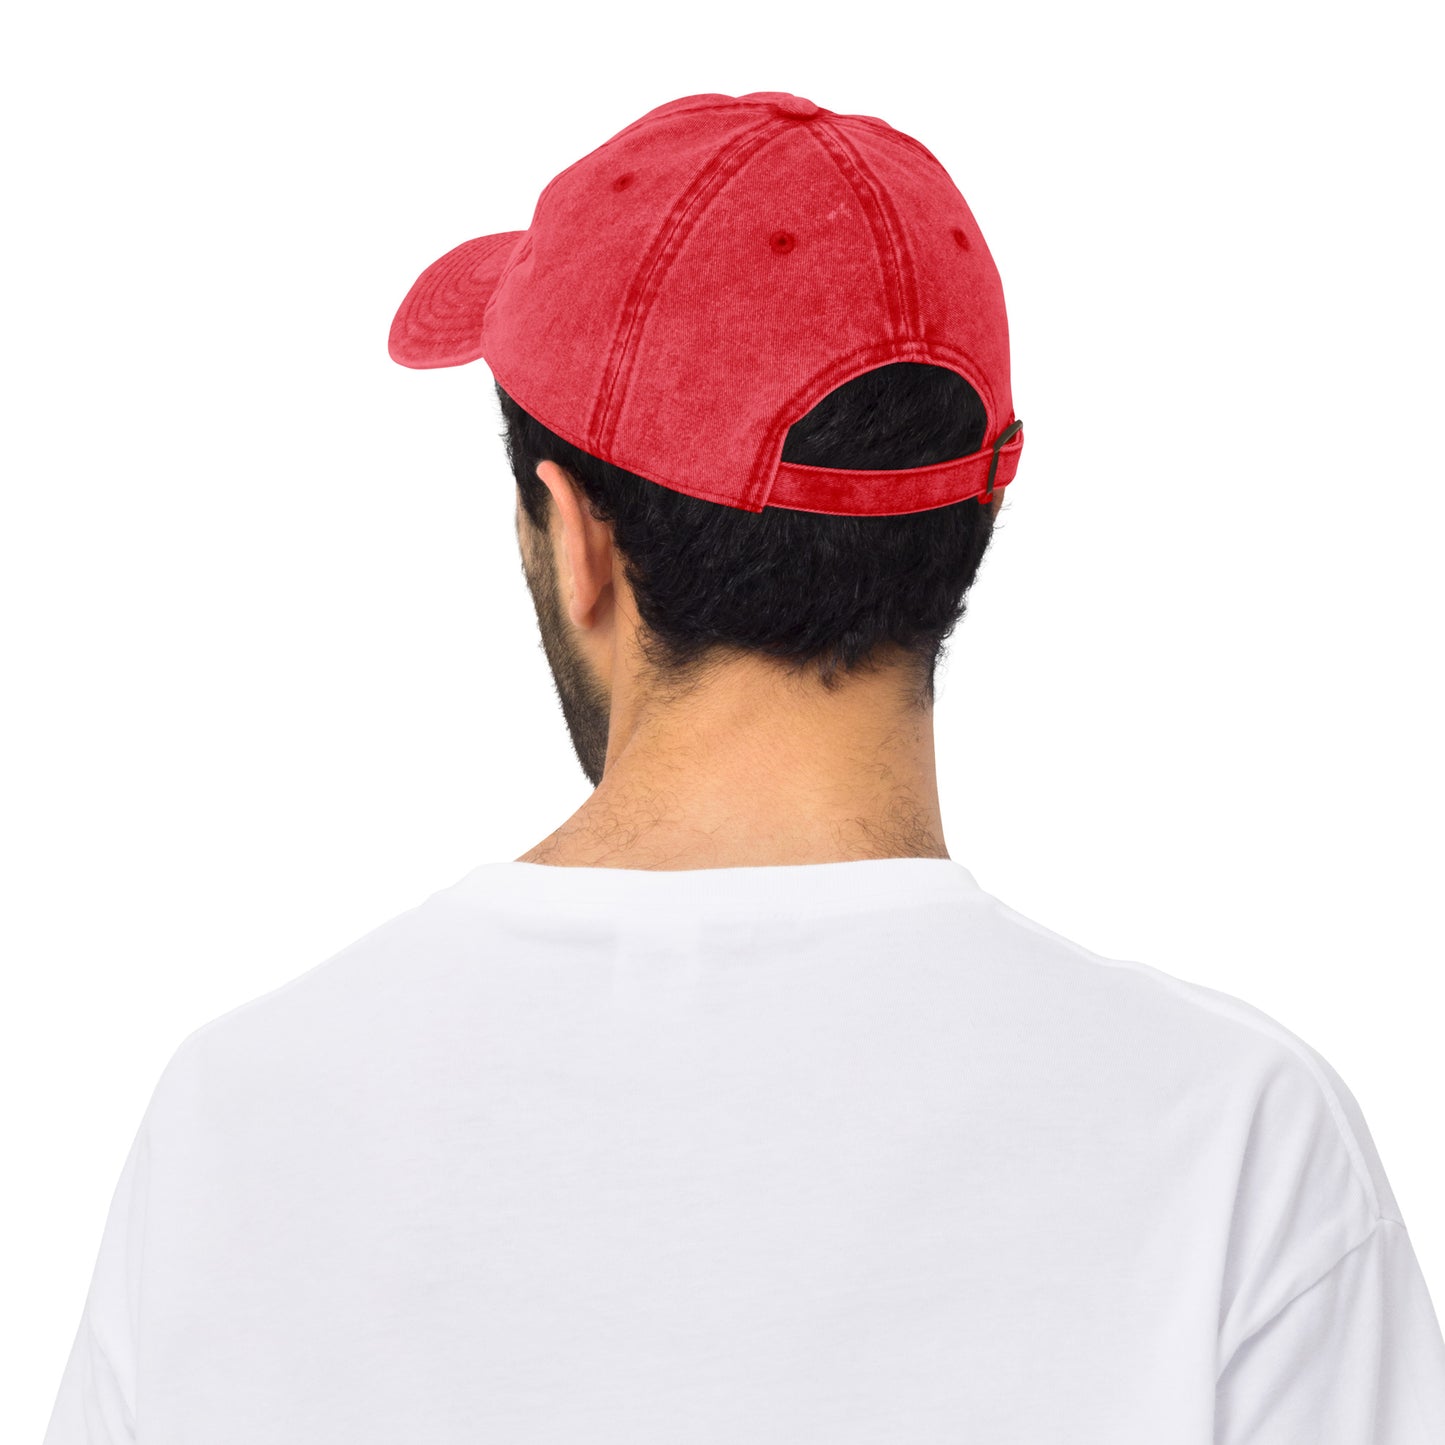 Maple Leaf Twill Cap - Red/White • YQB Quebec City • YHM Designs - Image 12